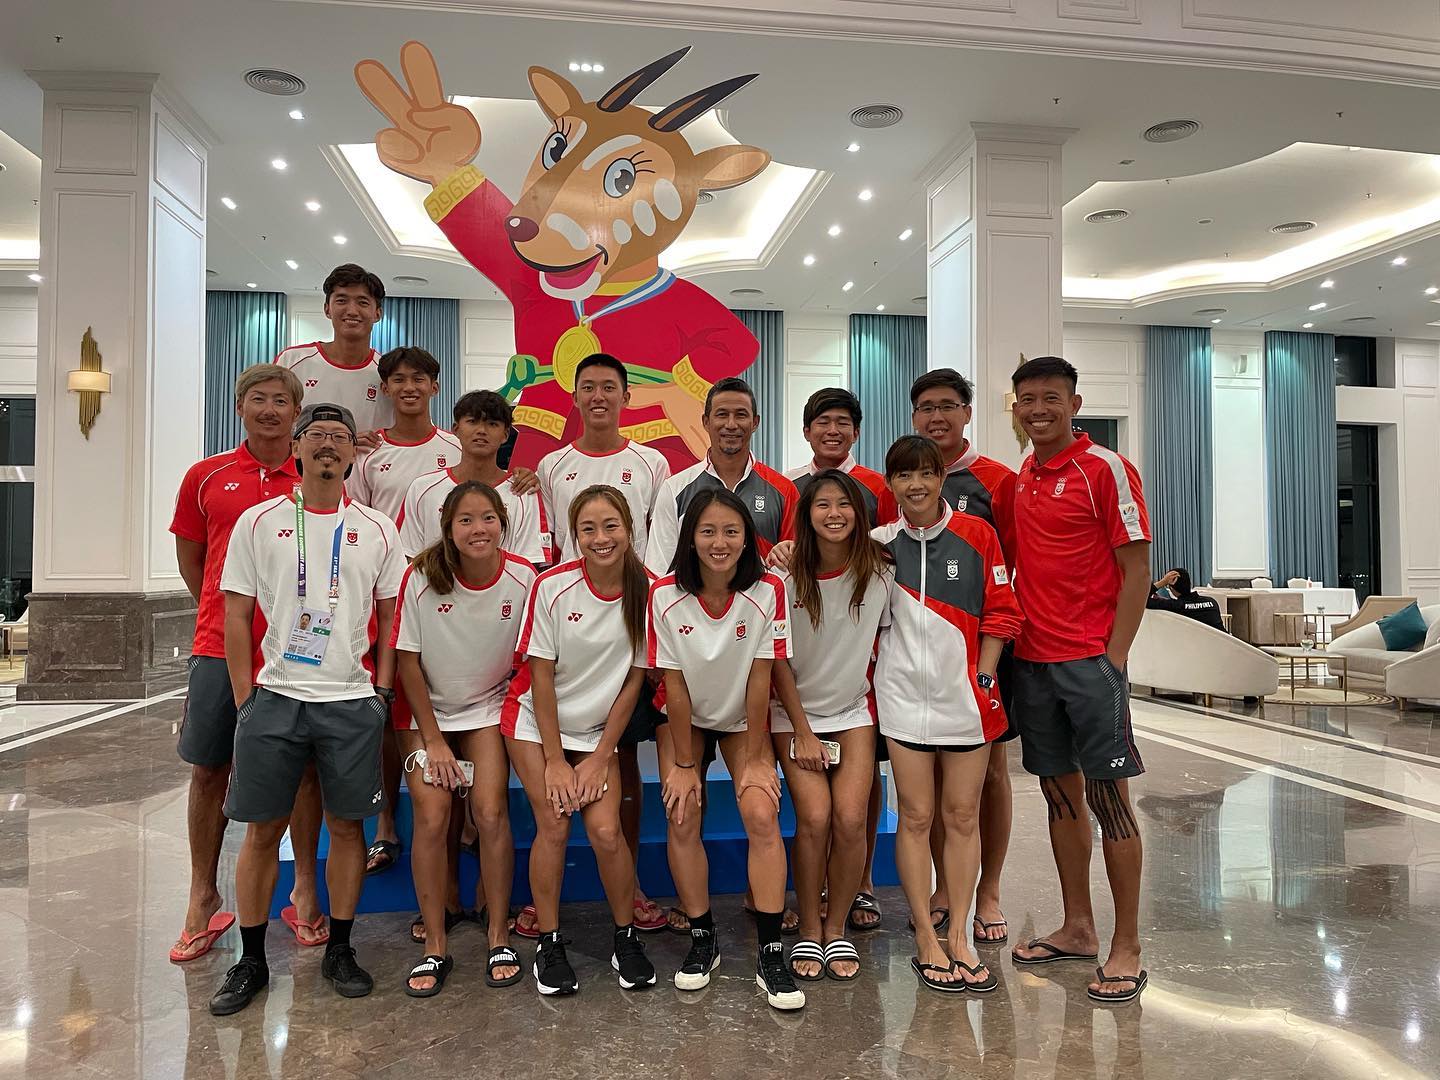 TeamSG's Beach Volleyballers returning home, after tough and challenging SEA Games campaign!